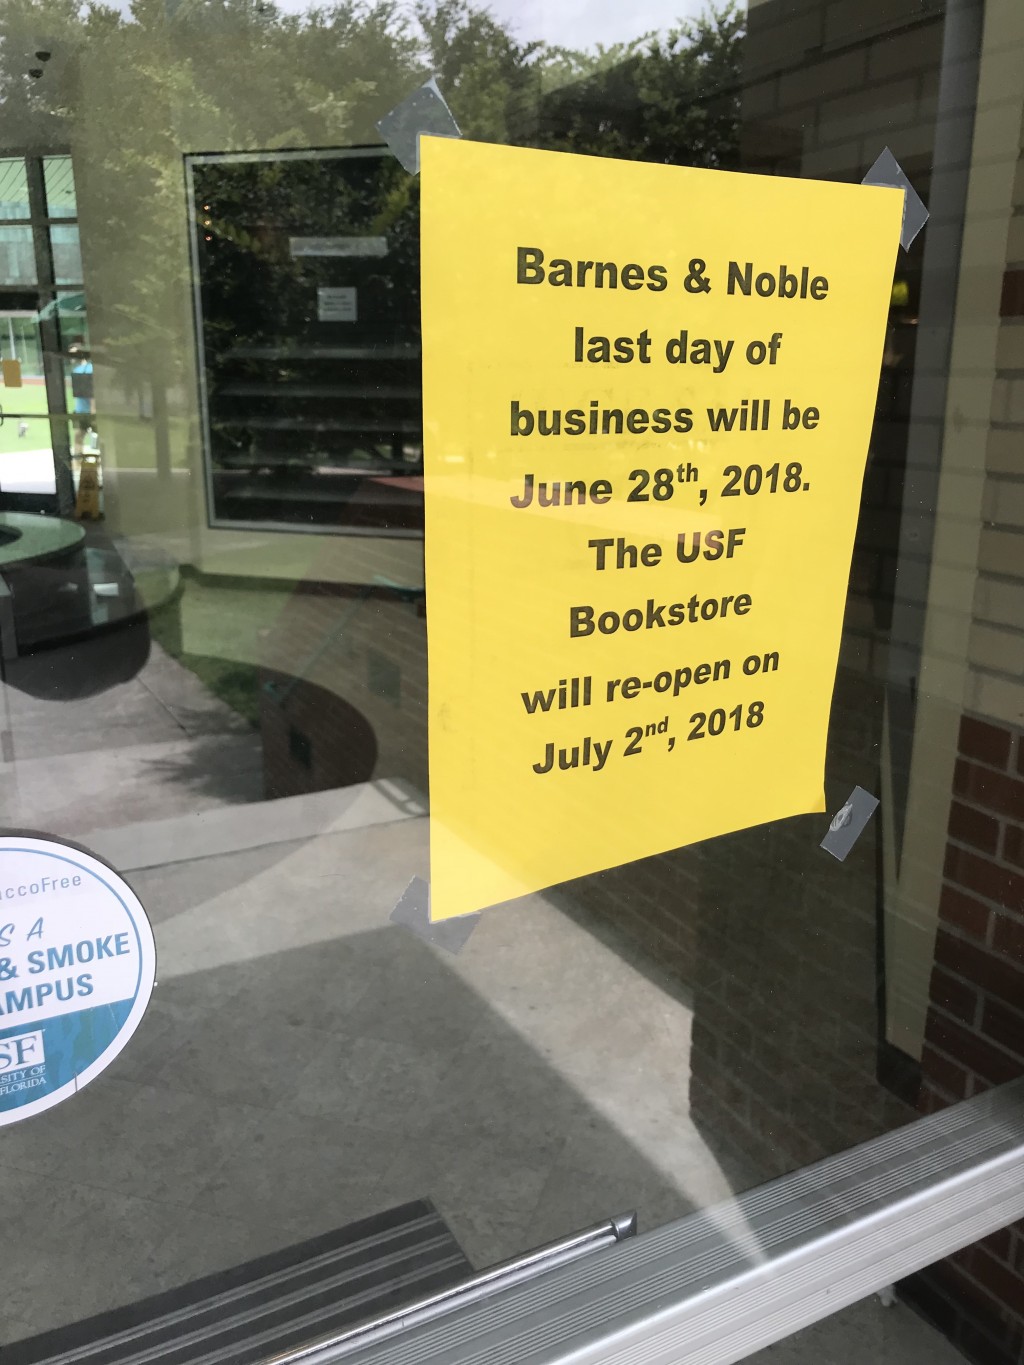 Follett replaces Barnes & Noble as operators of on-campus bookstore